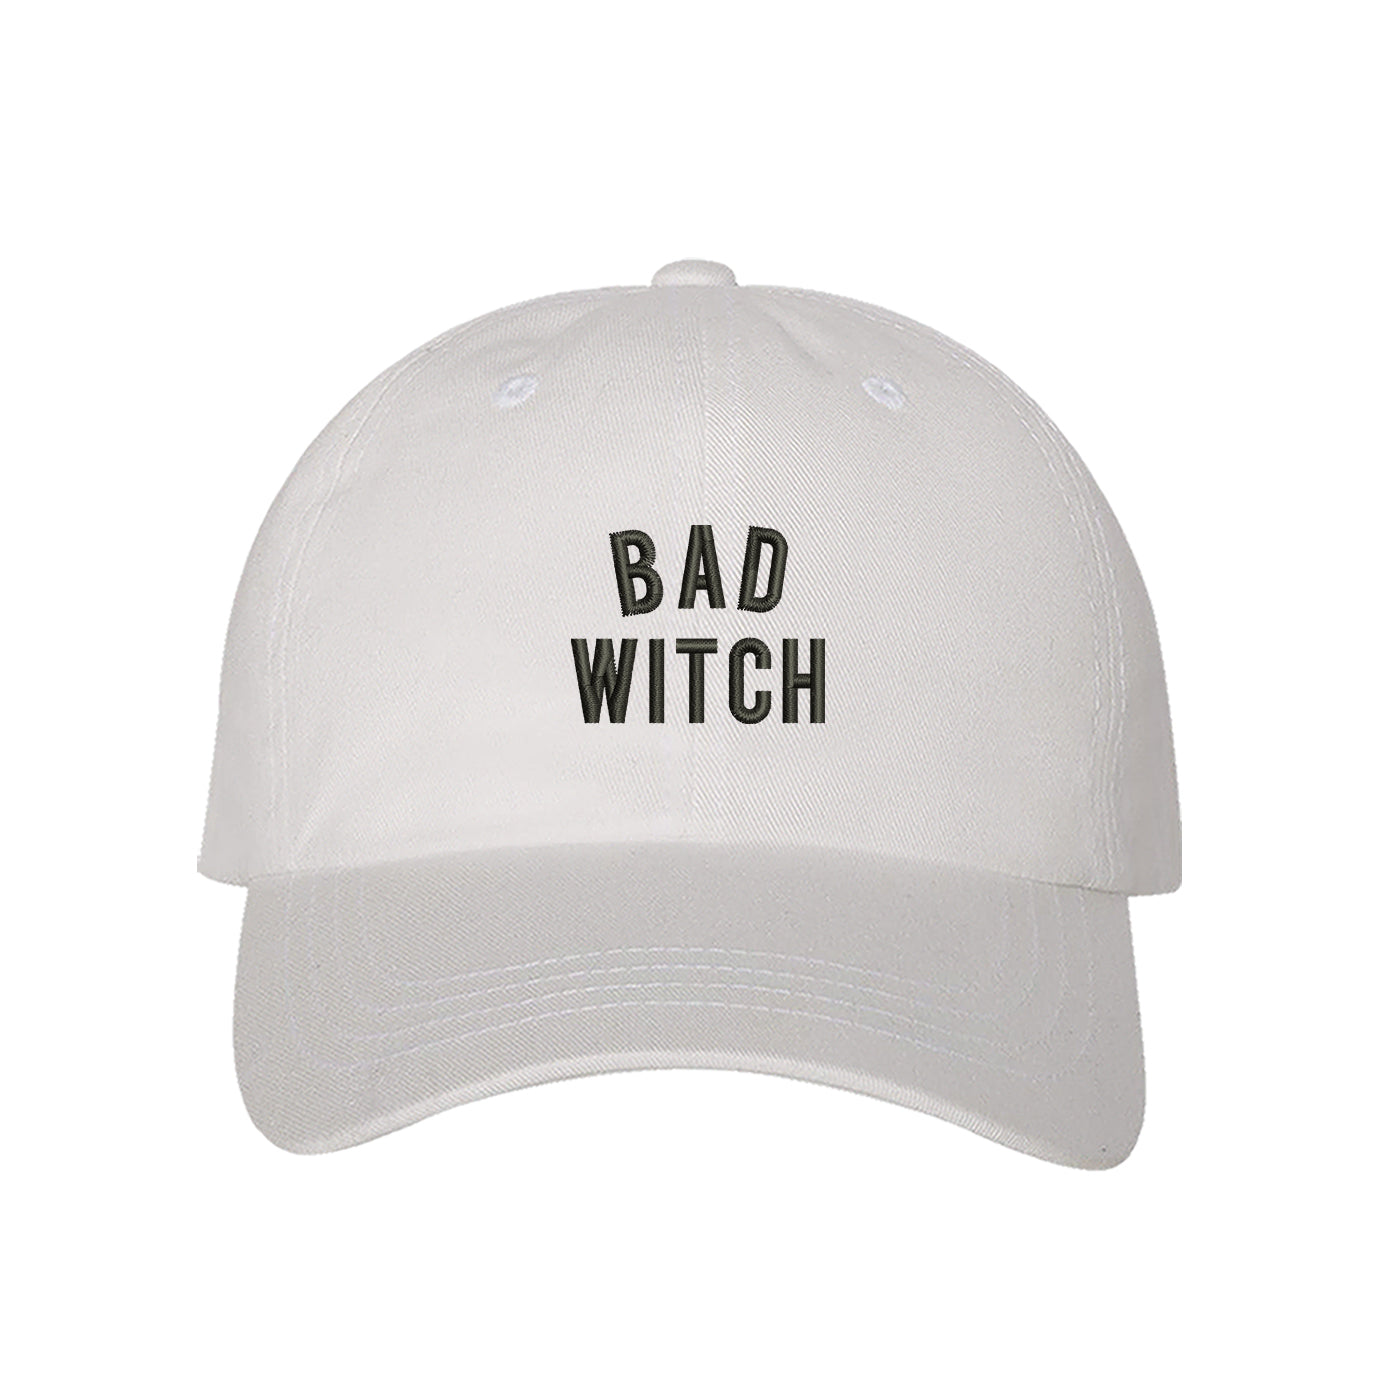 Unisex Bad Witch Dad Hat, Baseball Hat, Bad Witch Hats, Witch, Embroidered Hat, Embroidered Bad Witch, Custom Embroidery, DSY Lifestyle Hats, White Dad Hat, Made in LA